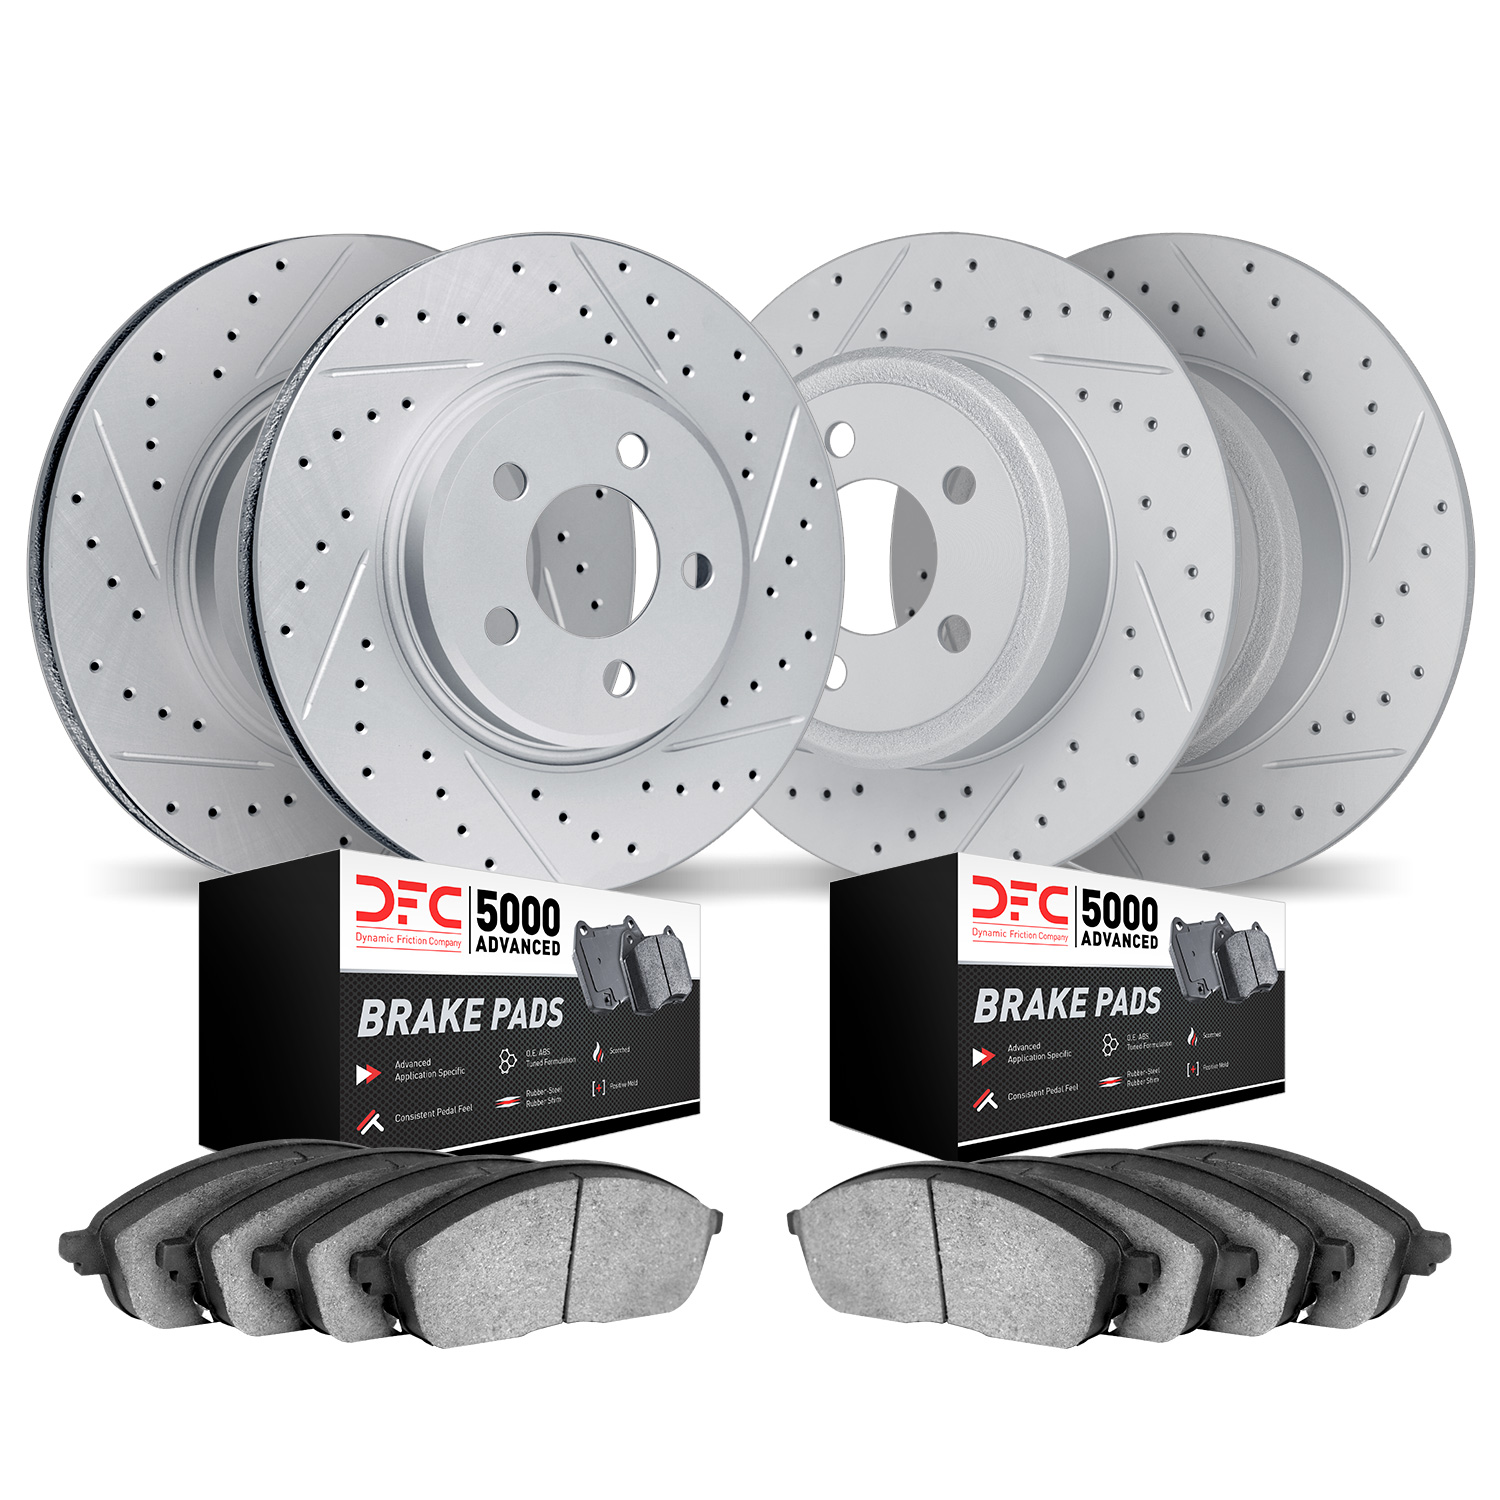 2504-54254 Geoperformance Drilled/Slotted Rotors w/5000 Advanced Brake Pads Kit, 2000-2004 Ford/Lincoln/Mercury/Mazda, Position: